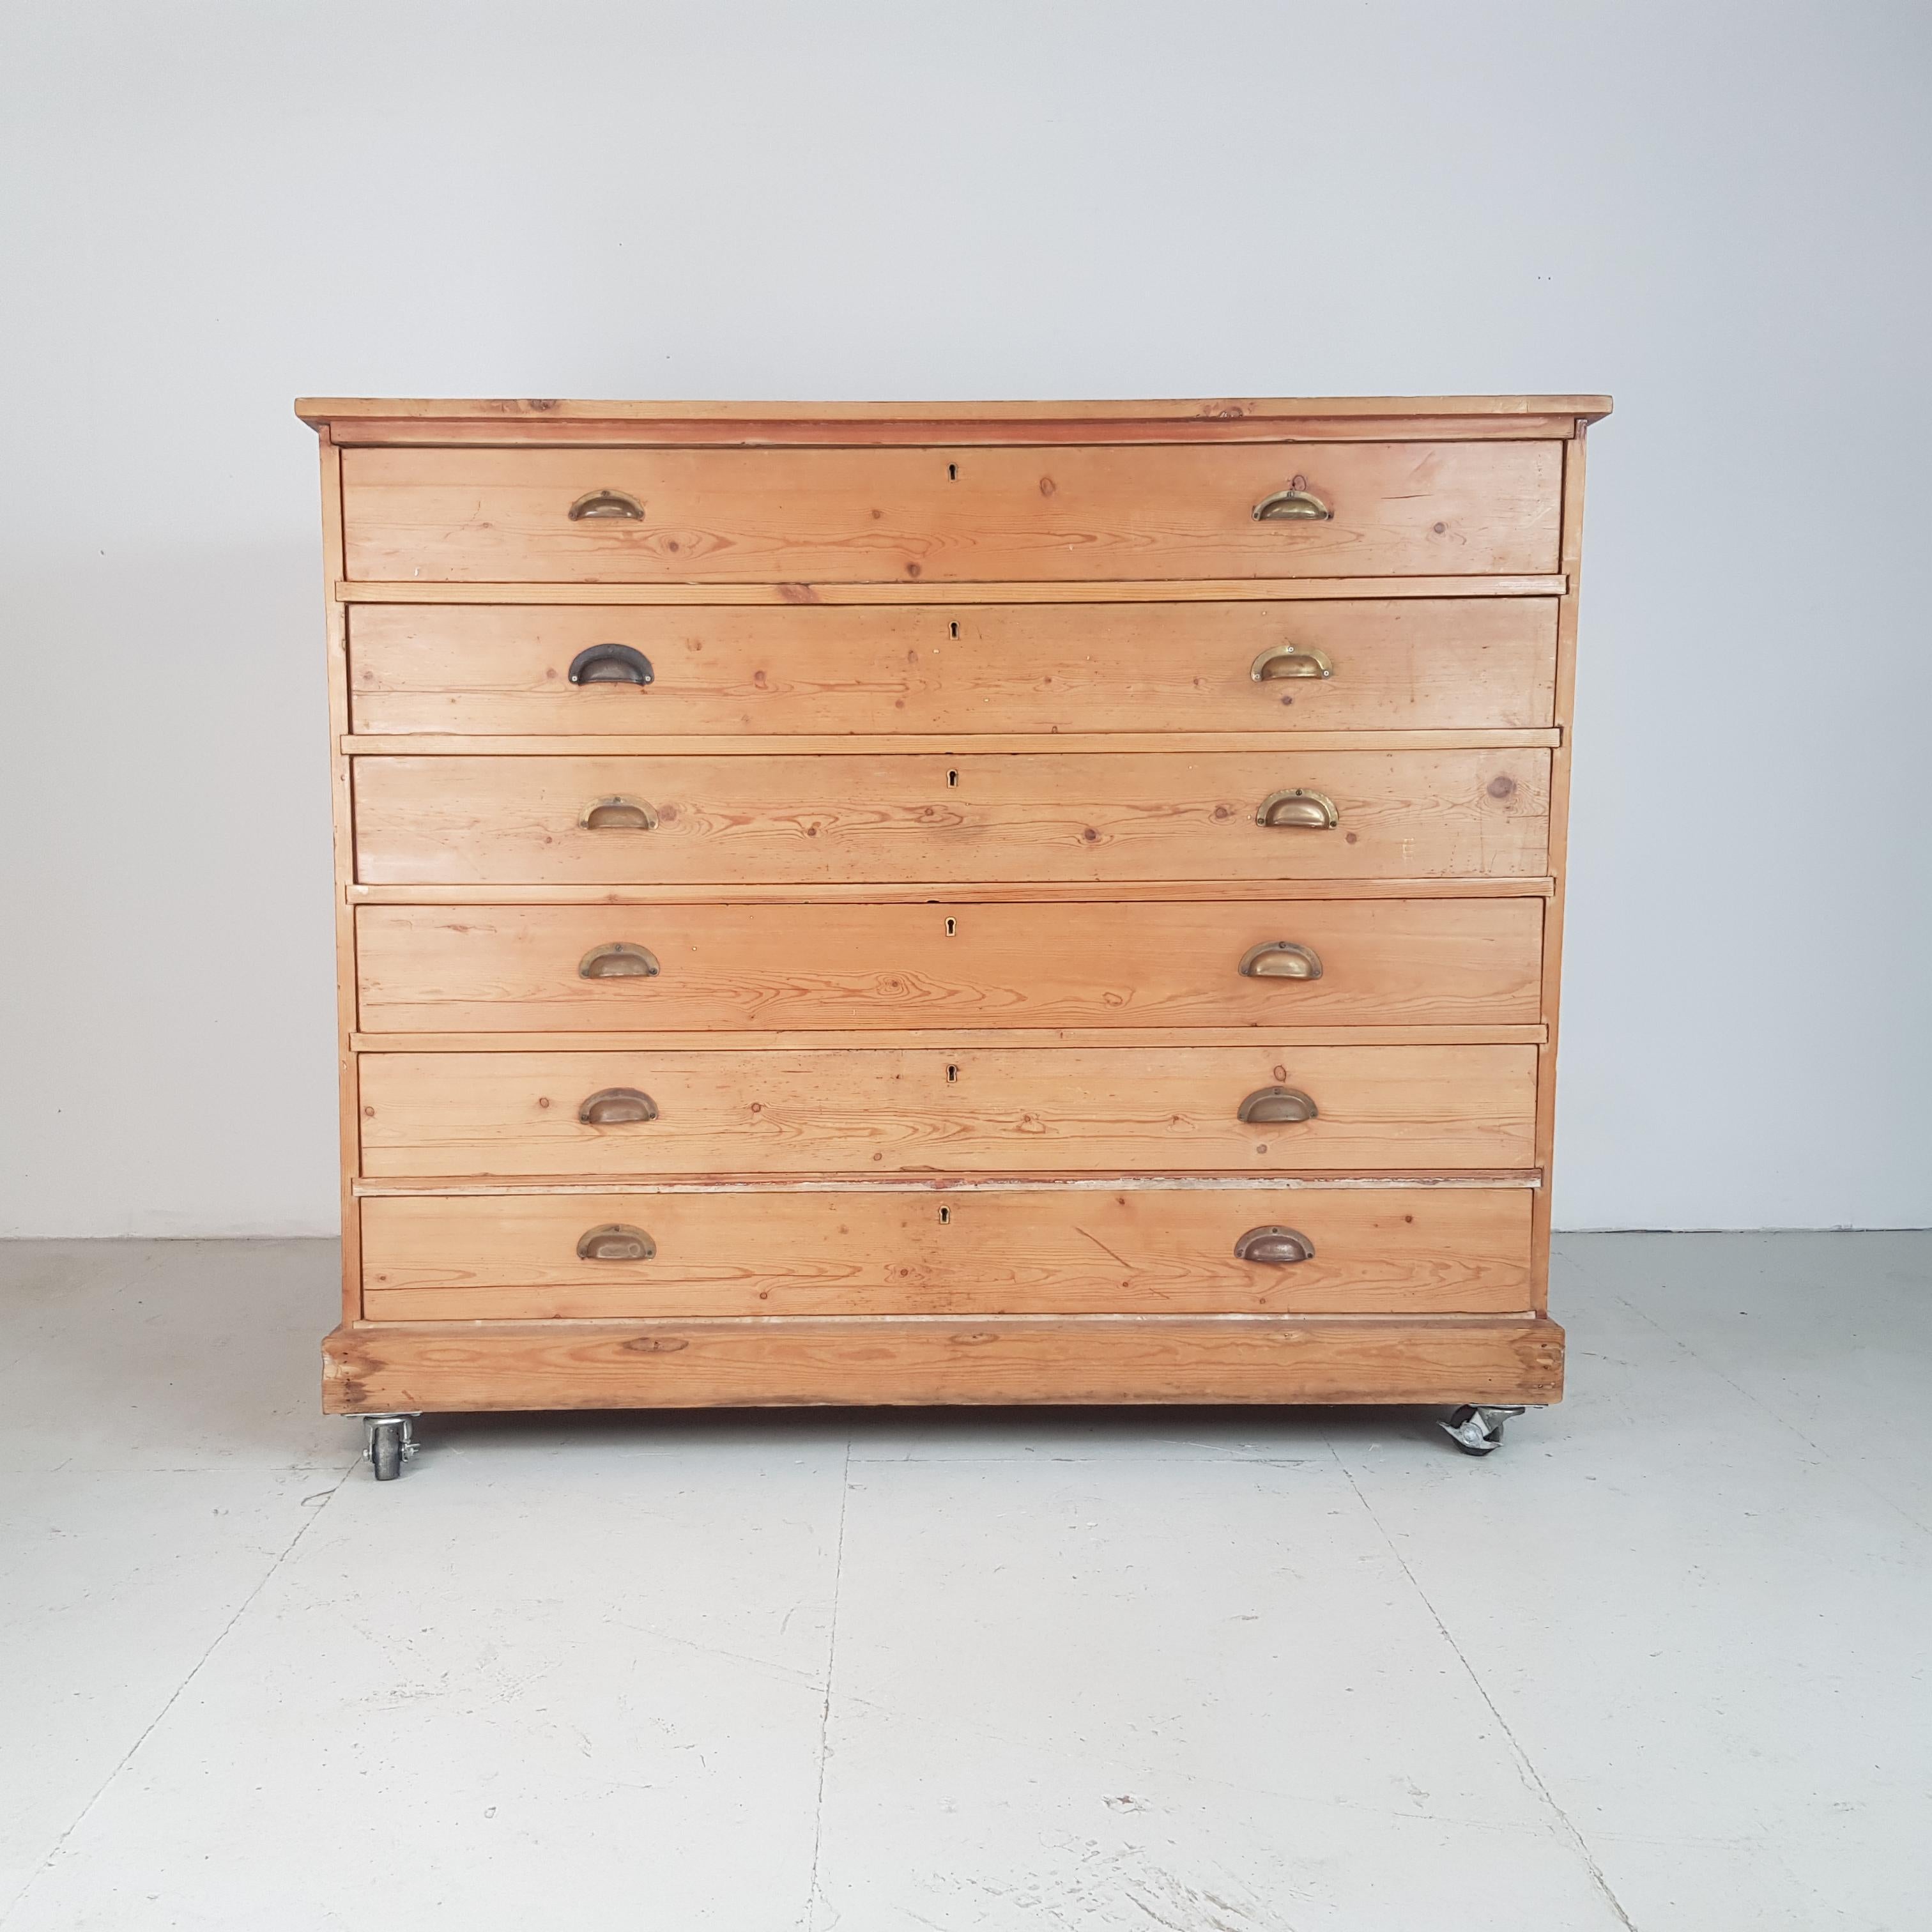 Vintage Large 1930s Plan Chest with Brass Handles im Zustand „Gut“ im Angebot in Lewes, East Sussex